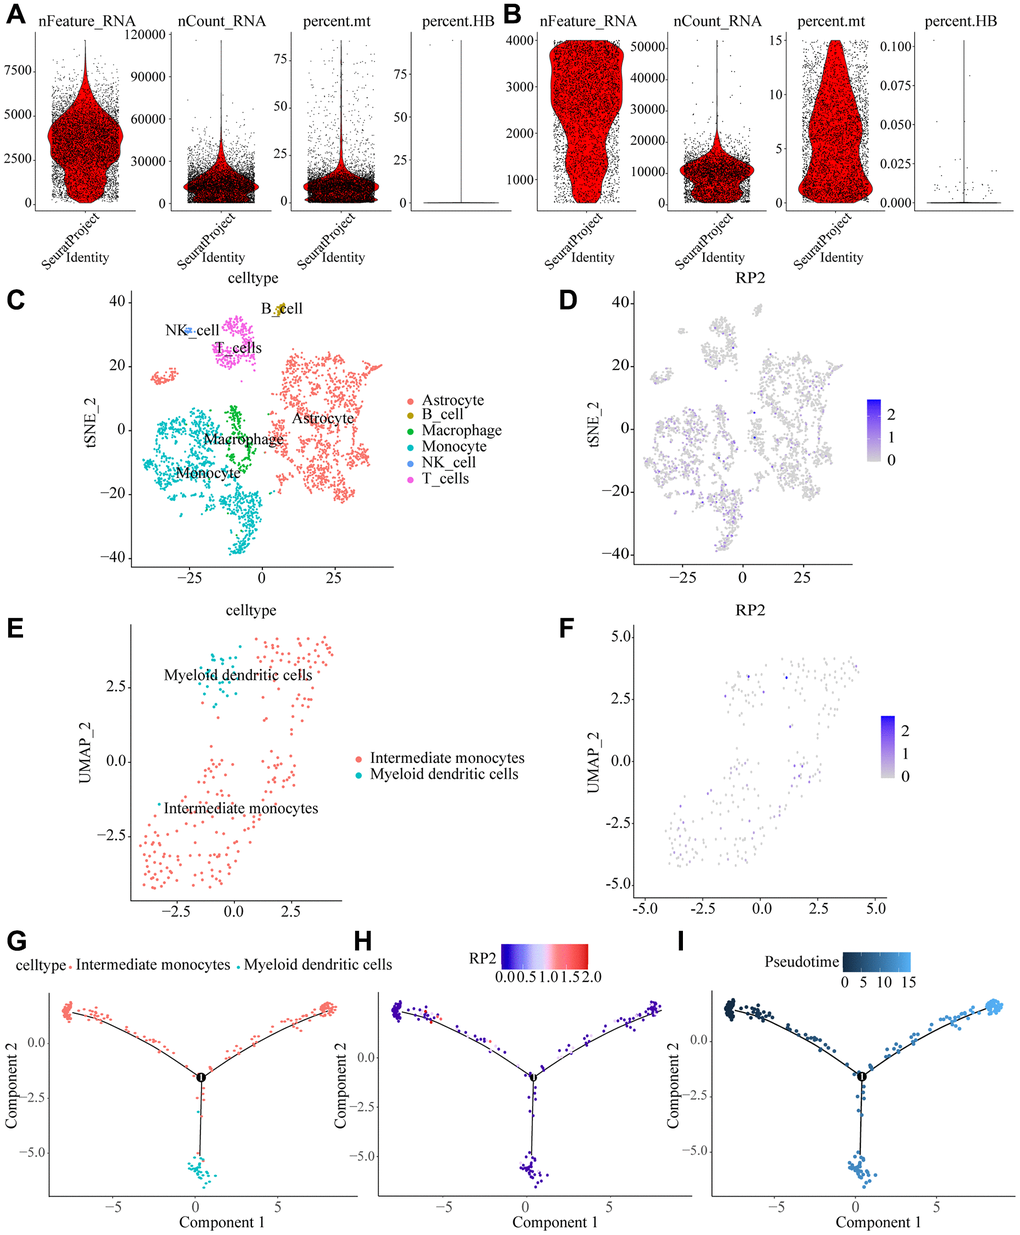 Macrophage dynamics in glioma progression. (A, B) Quality control removal of low-quality cells (C) tSNE cell cluster analysis differentiating cell types in the tumor microenvironment. (D) Tumor cells were divided into 13 clusters showing RP2 expression sites in the tumor microenvironment. (E) Cell reclustering was performed by UAMP method, and macrophage types were analyzed. (F) expression of RP2 was shown in the reclustering cells. (G) Evolutionary tracks of all kinds of cells after dimension reduction (H) expression of RP2 changes with pseudo time (I) differentiation tracks of macrophages in glioma, with cluster color code.